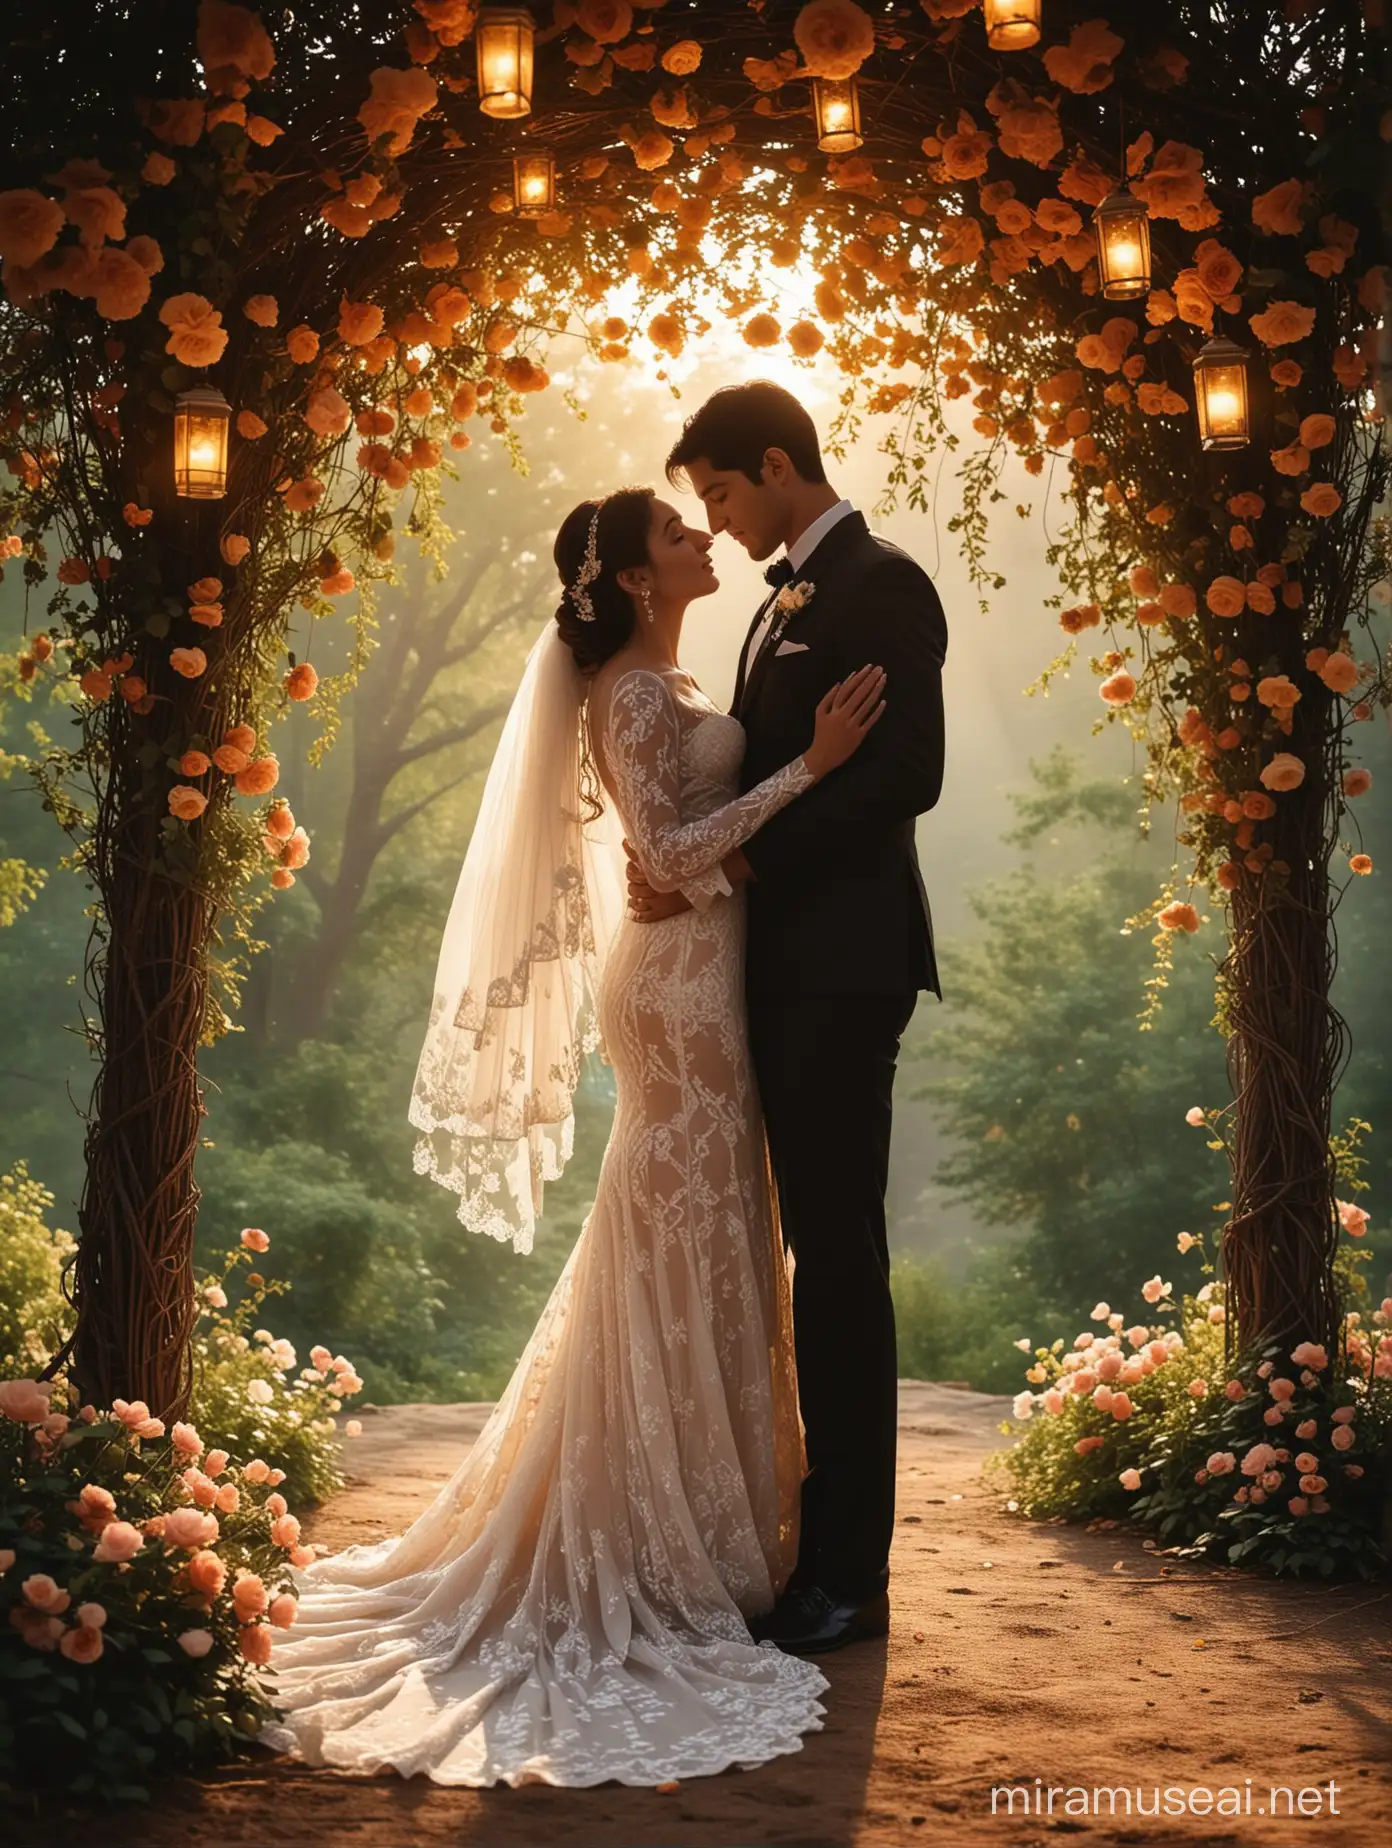 As the sun begins its descent behind the distant hills, casting hues of amber and gold across the sky, the mid-journey of their union unfolds. In the heart of a tranquil garden, adorned with fragrant blossoms and draped in the soft glow of lanterns, stands the bride and groom, silhouetted against the fading light.  The groom, resplendent in his tailored suit, stands tall and proud, his silhouette etched with anticipation and love. His eyes, though obscured, reflect the radiant joy that fills his soul as he awaits his beloved.  Beside him stands the bride, ethereal in her gown of ivory lace, her silhouette a graceful dance of delicate curves and flowing fabric. In her hands, she clutches a bouquet of roses, their vibrant hues a testament to the passion that beats within her heart.  As they stand beneath the canopy of intertwining branches, bathed in the warm embrace of cinematic lighting, time seems to stand still. In this moment, amidst the whispers of nature and the soft rustle of leaves, they are the sole inhabitants of a world painted with love.  Their silhouettes merge, two halves of a whole, as they prepare to embark on the next chapter of their journey together. And as the first stars begin to twinkle overhead, a promise is whispered on the breeze—a promise of forever, sealed with a kiss beneath the veil of twilight.